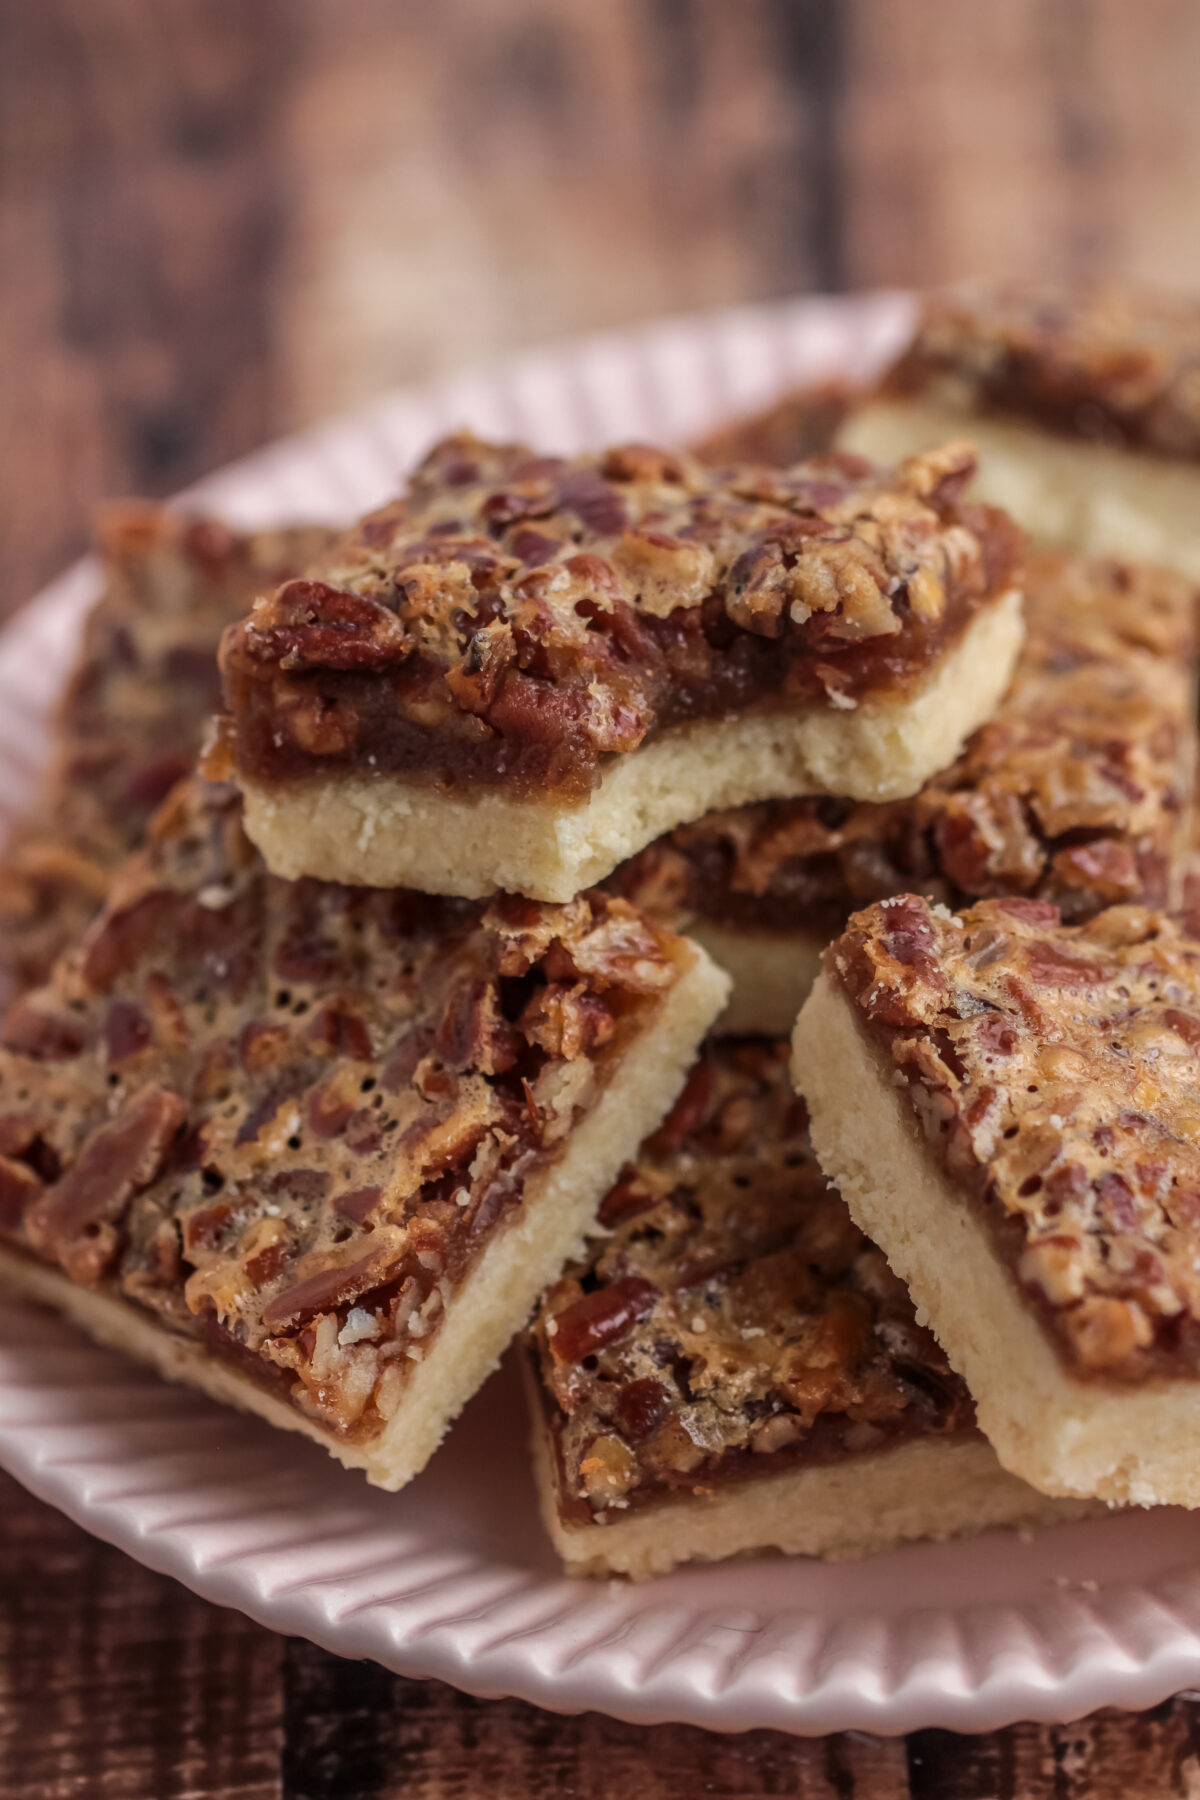 These pecan pie bars are the best dessert for family gatherings! With a gooey filling, and loads of pecans, they're sure to be a hit.